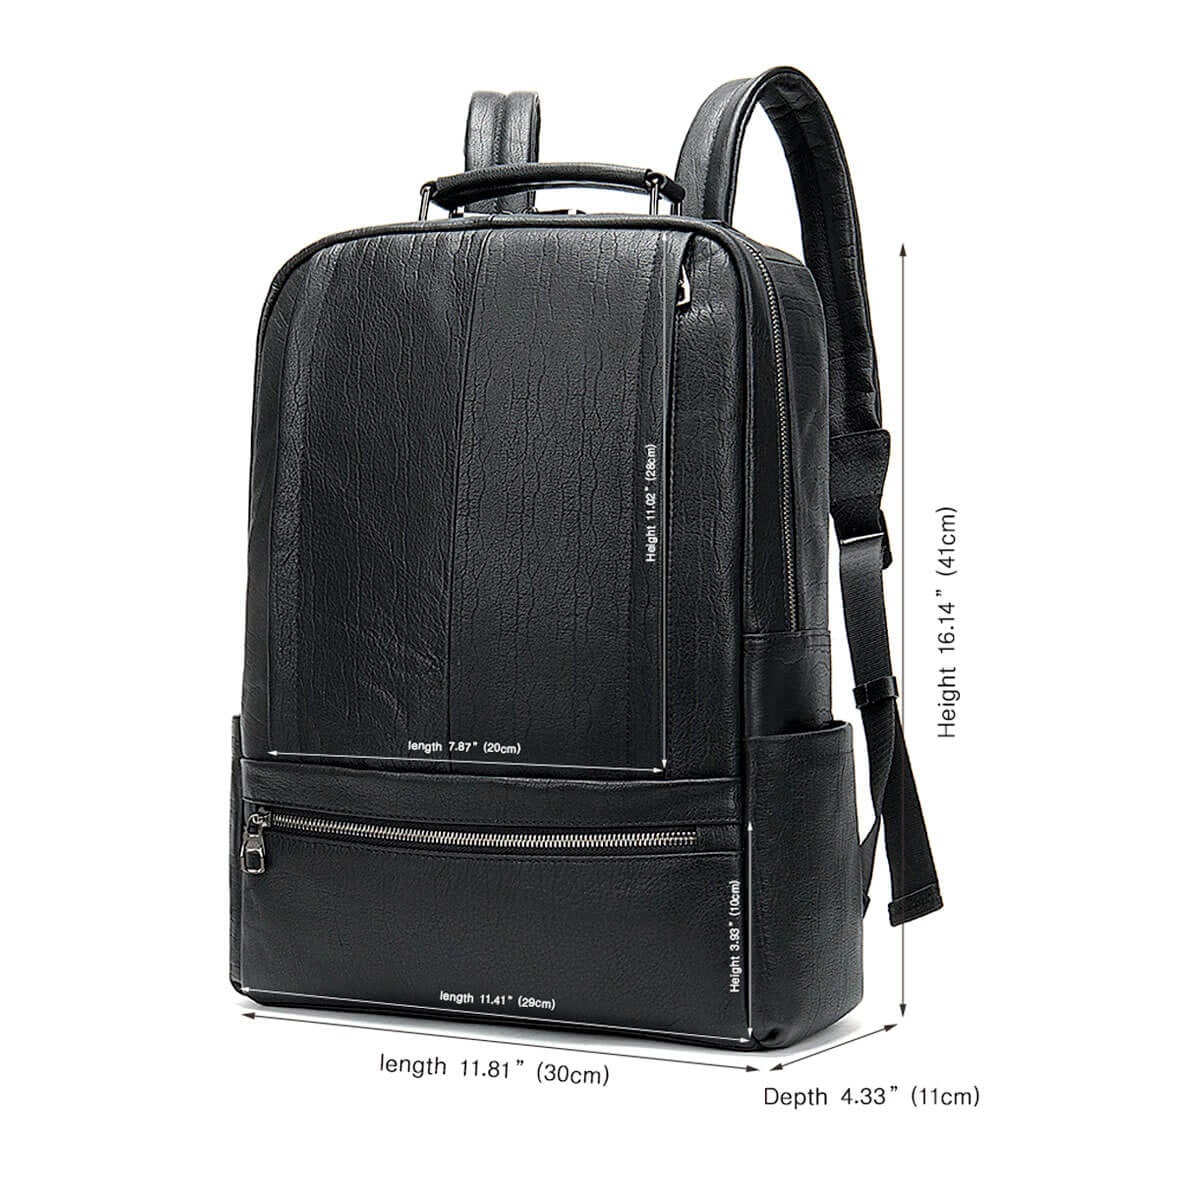 Large Capacity Black Leather Waterproof Classic Backpack